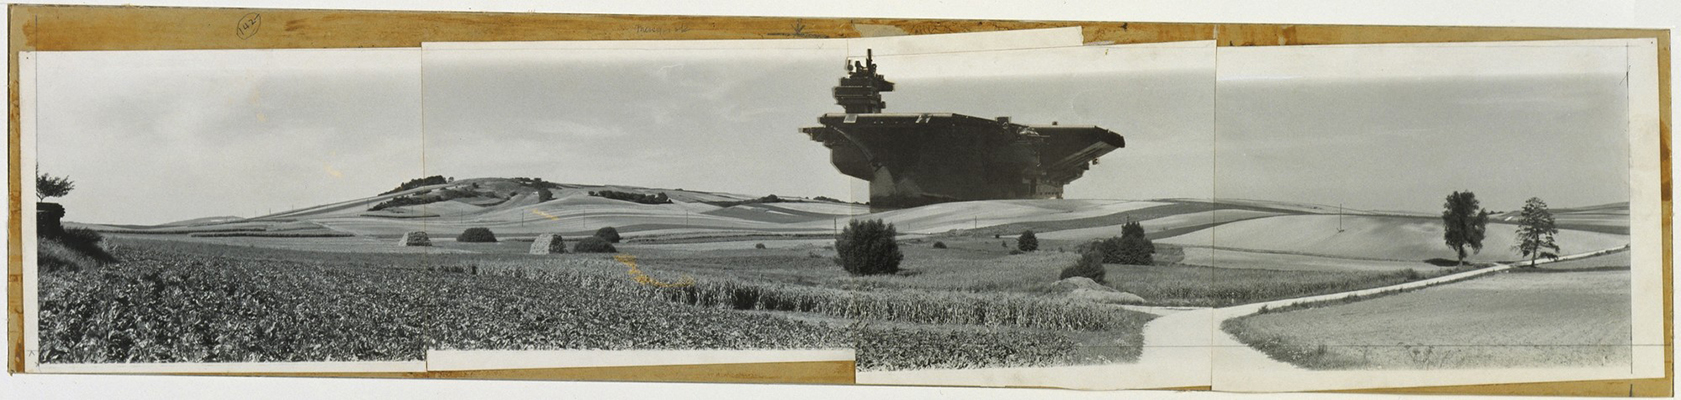 Aircraft Carrier City in Landscape<br>Hans Hollein<br>1964